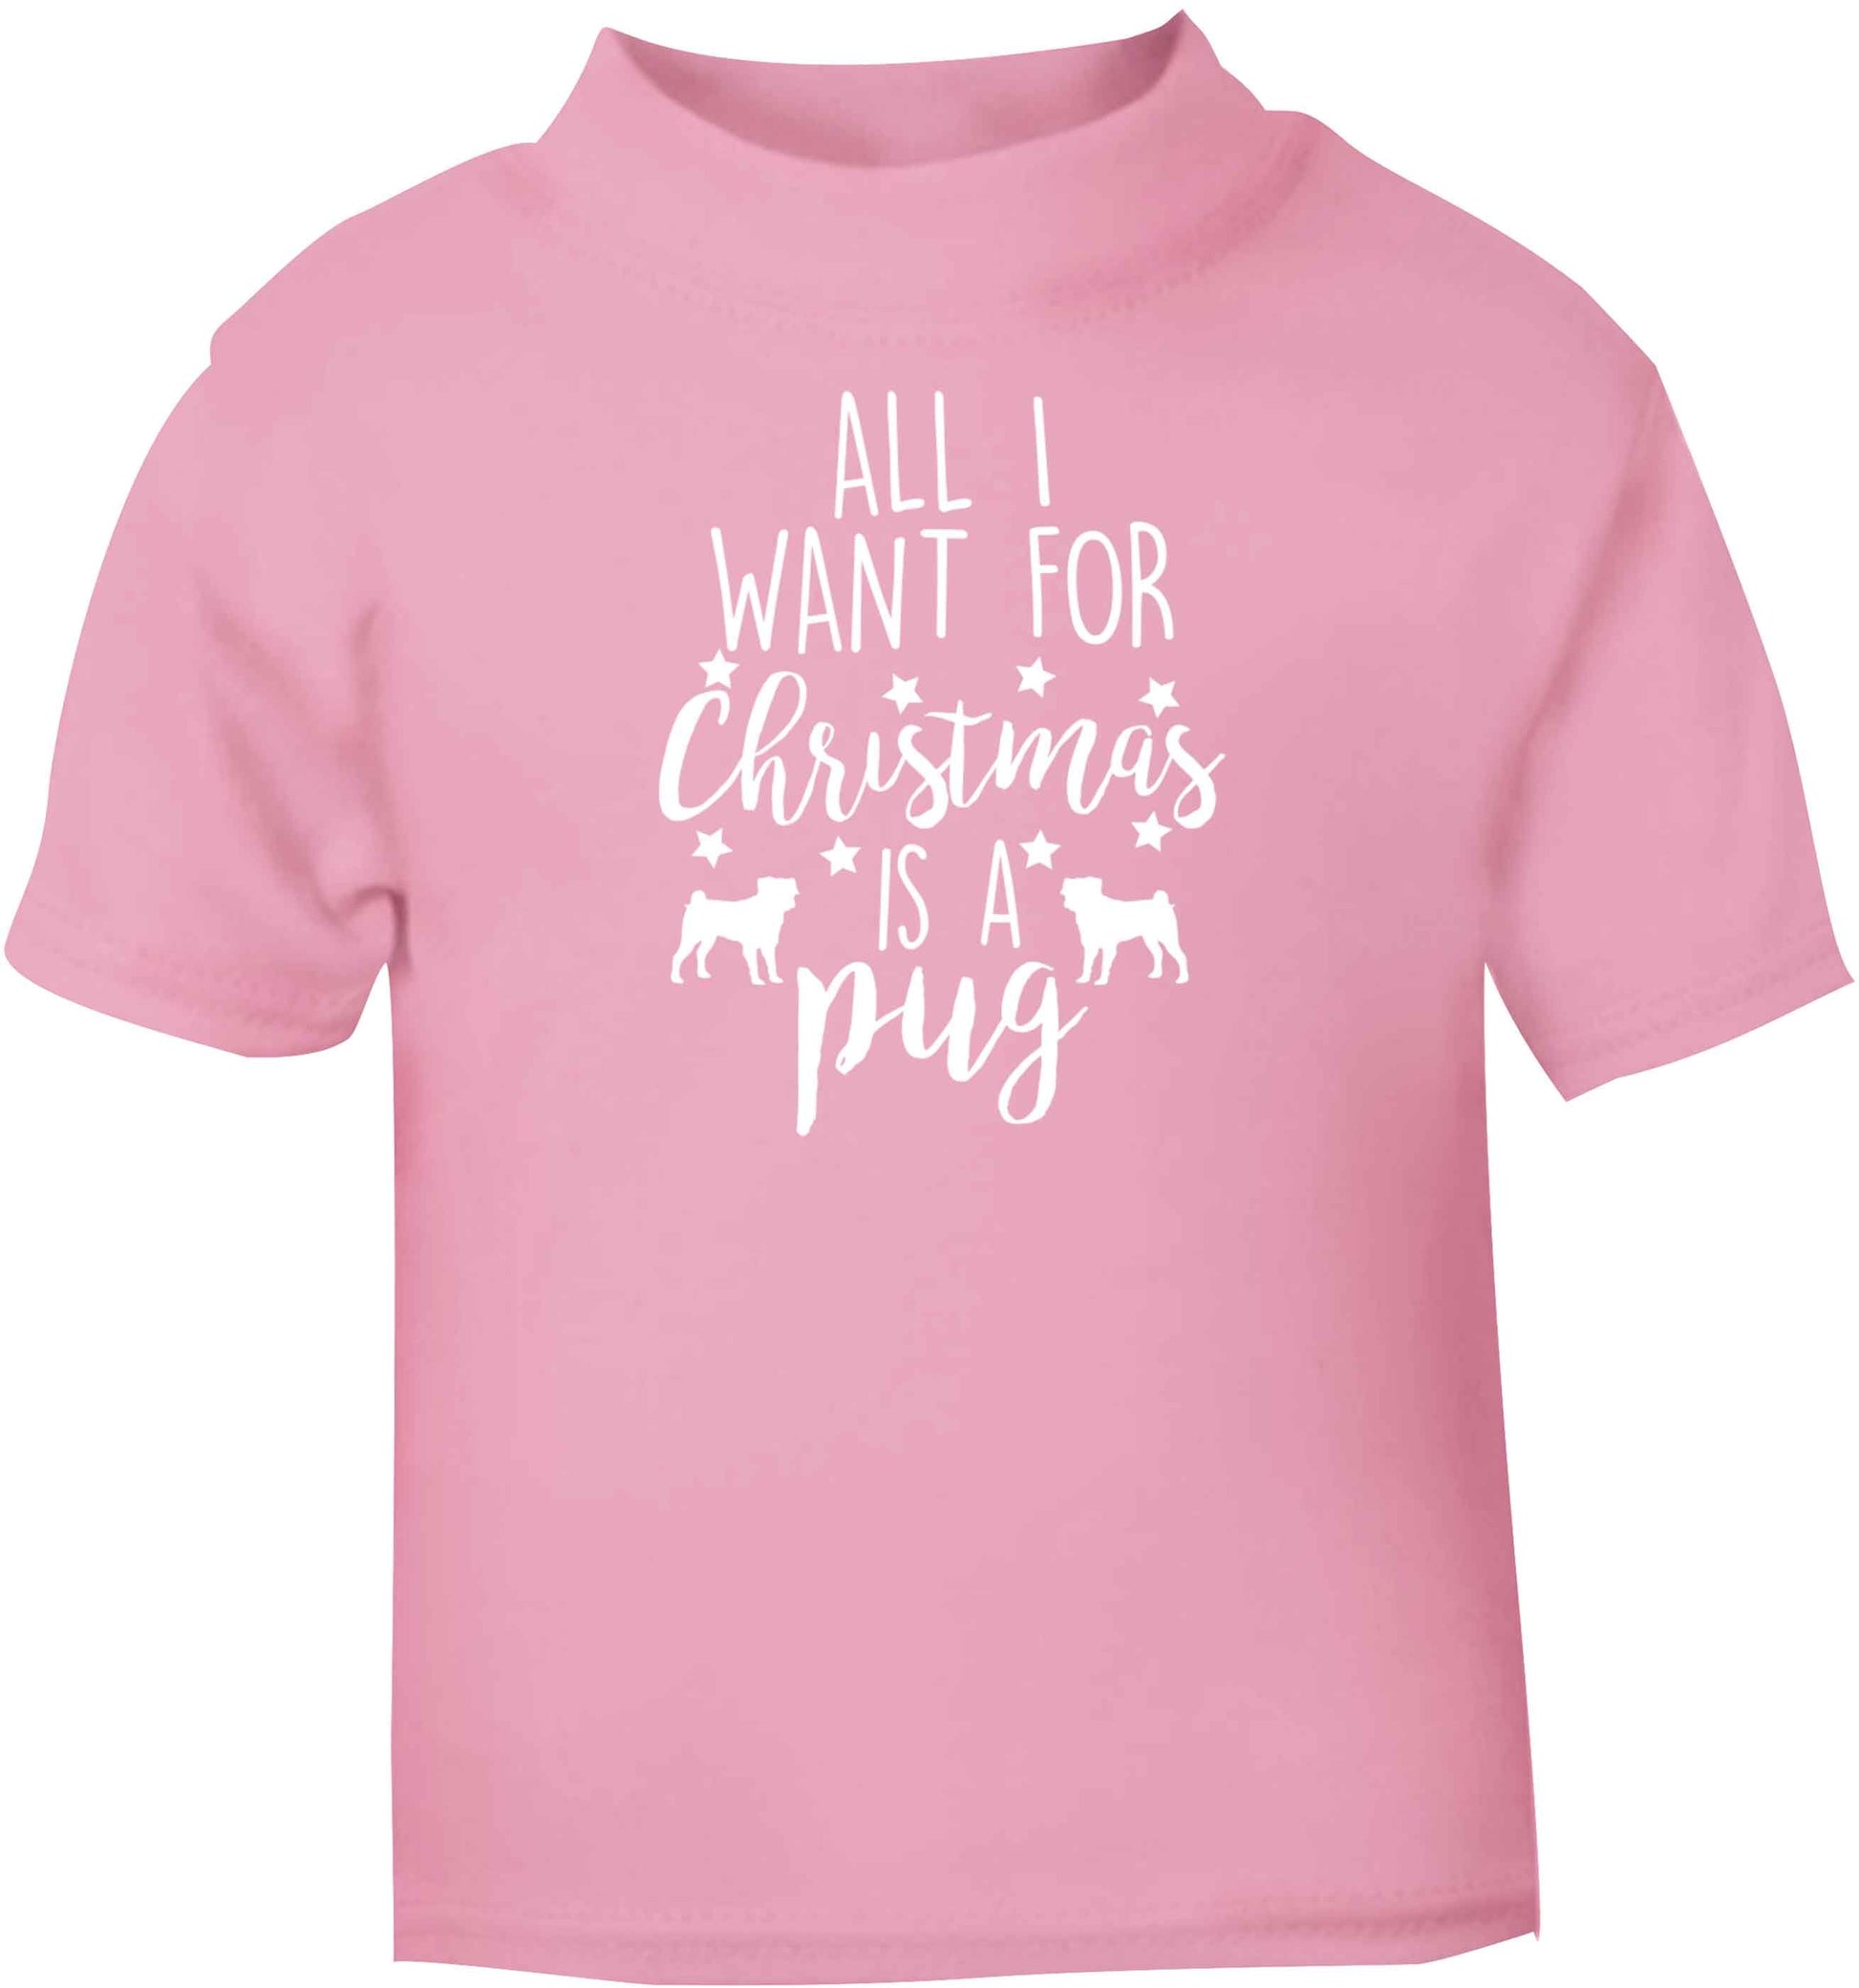 All I want for Christmas is a pug light pink baby toddler Tshirt 2 Years